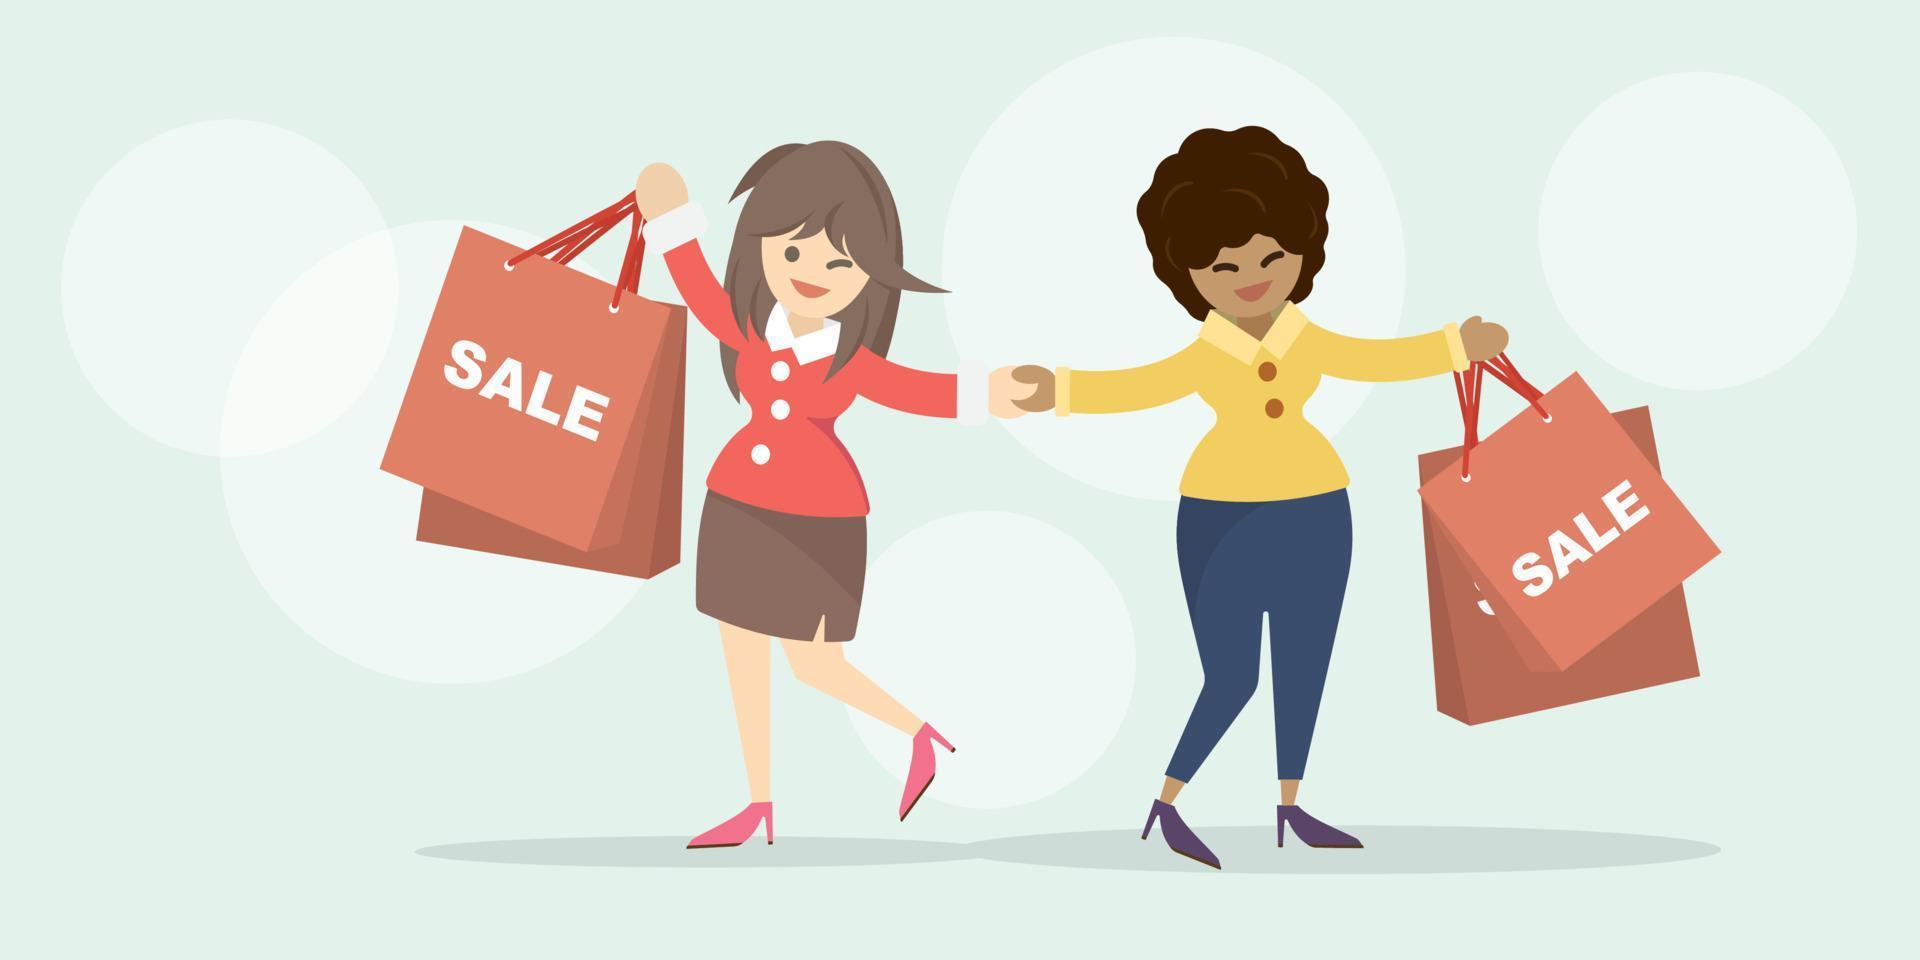 Couple of businesswomen with a lot of shopping bags in hands during the sale or discount at the end of season. Happy women shopping together. Vector cartoon flat illustration.